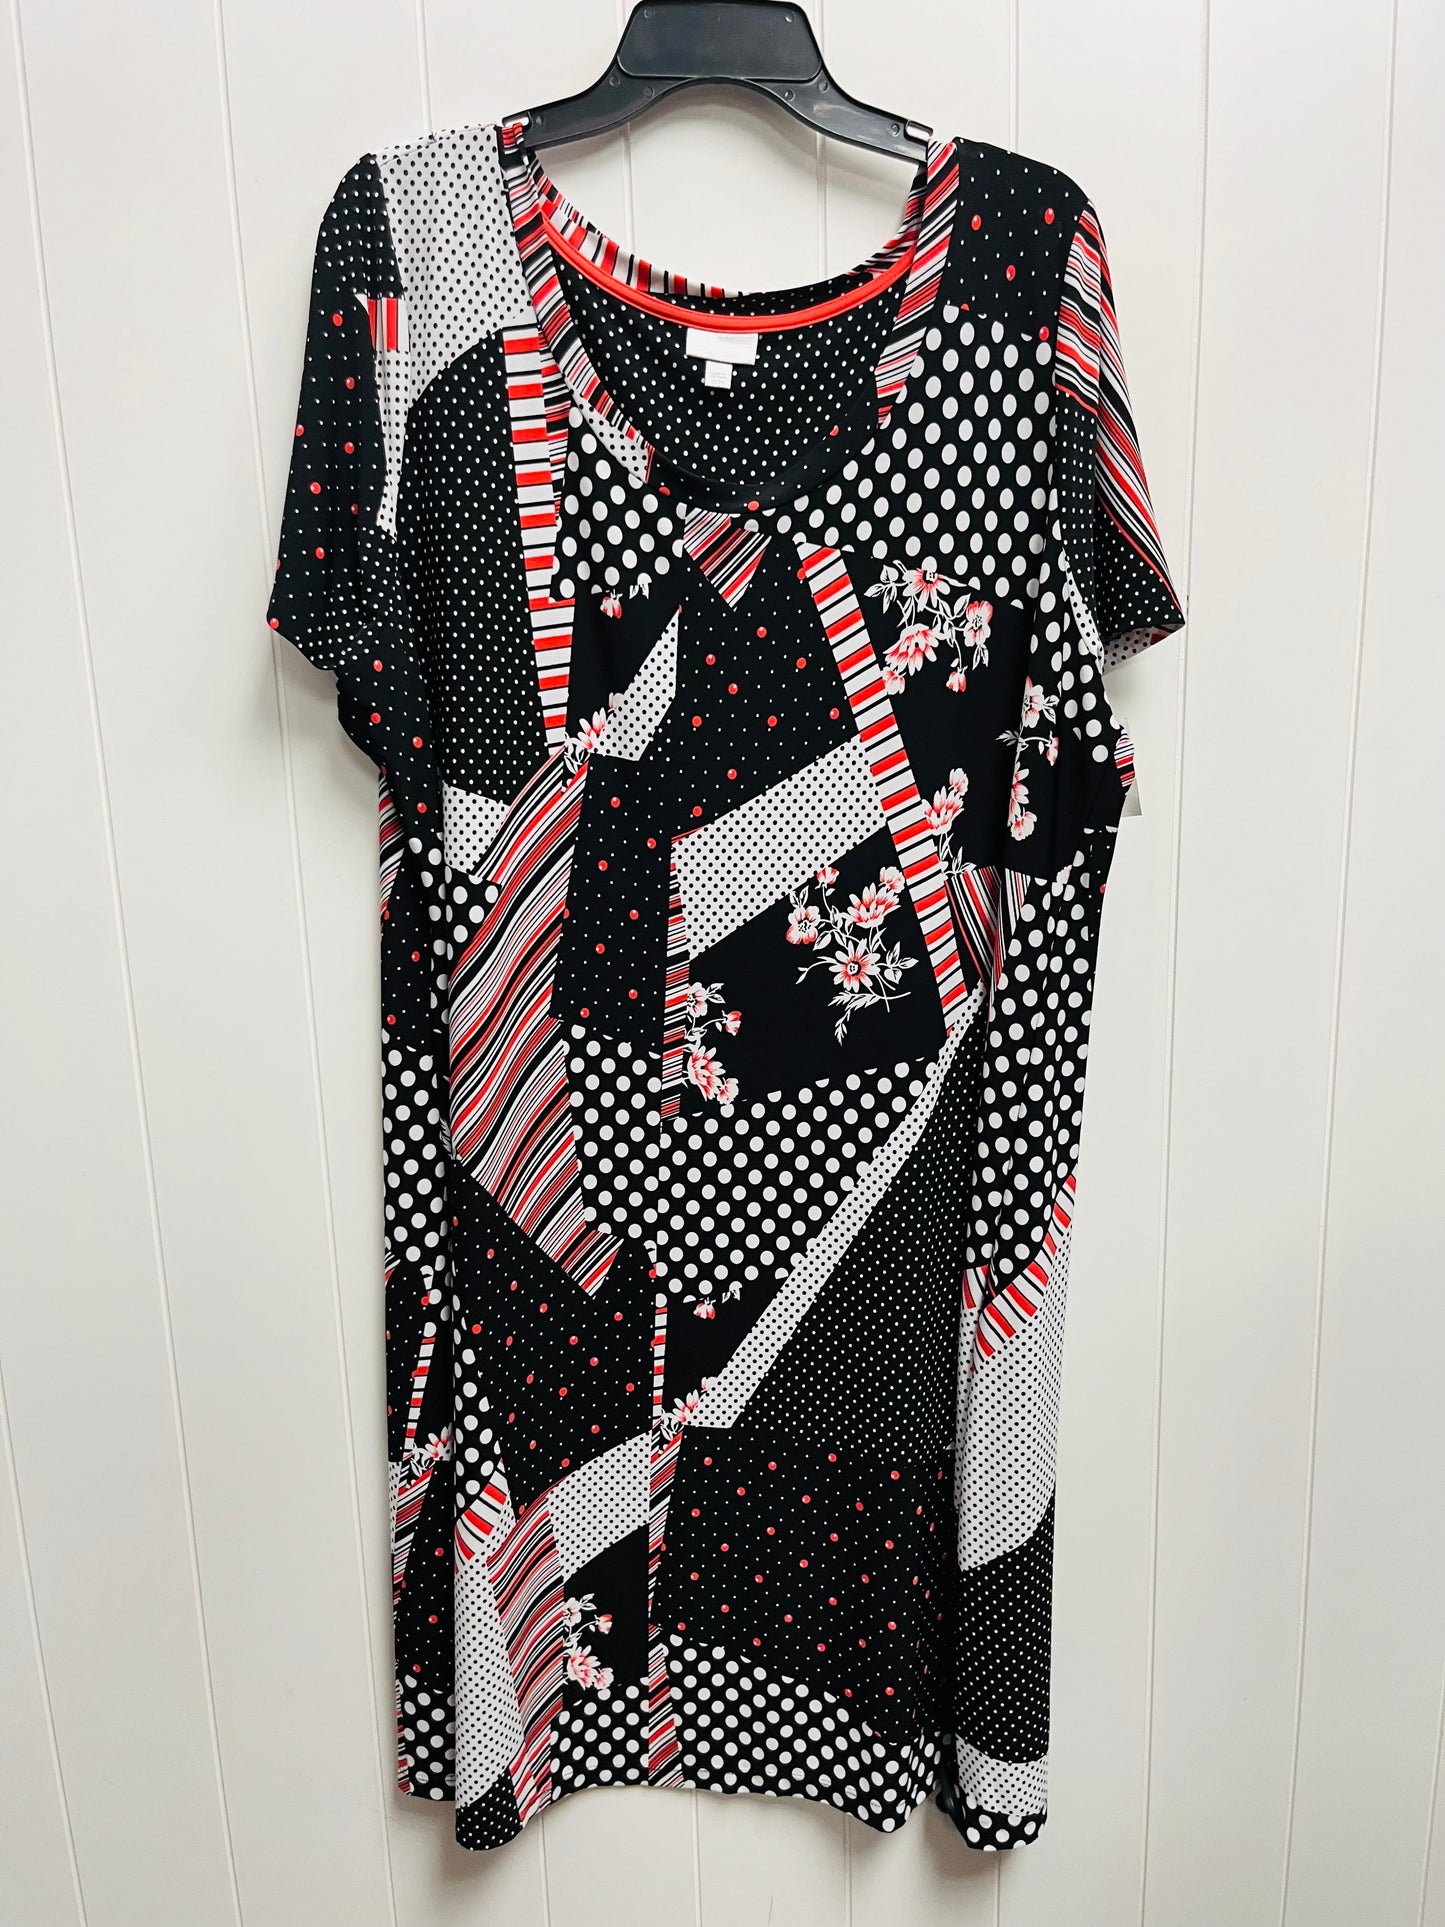 Black & Red Dress Casual Short Avenue, Size 2x